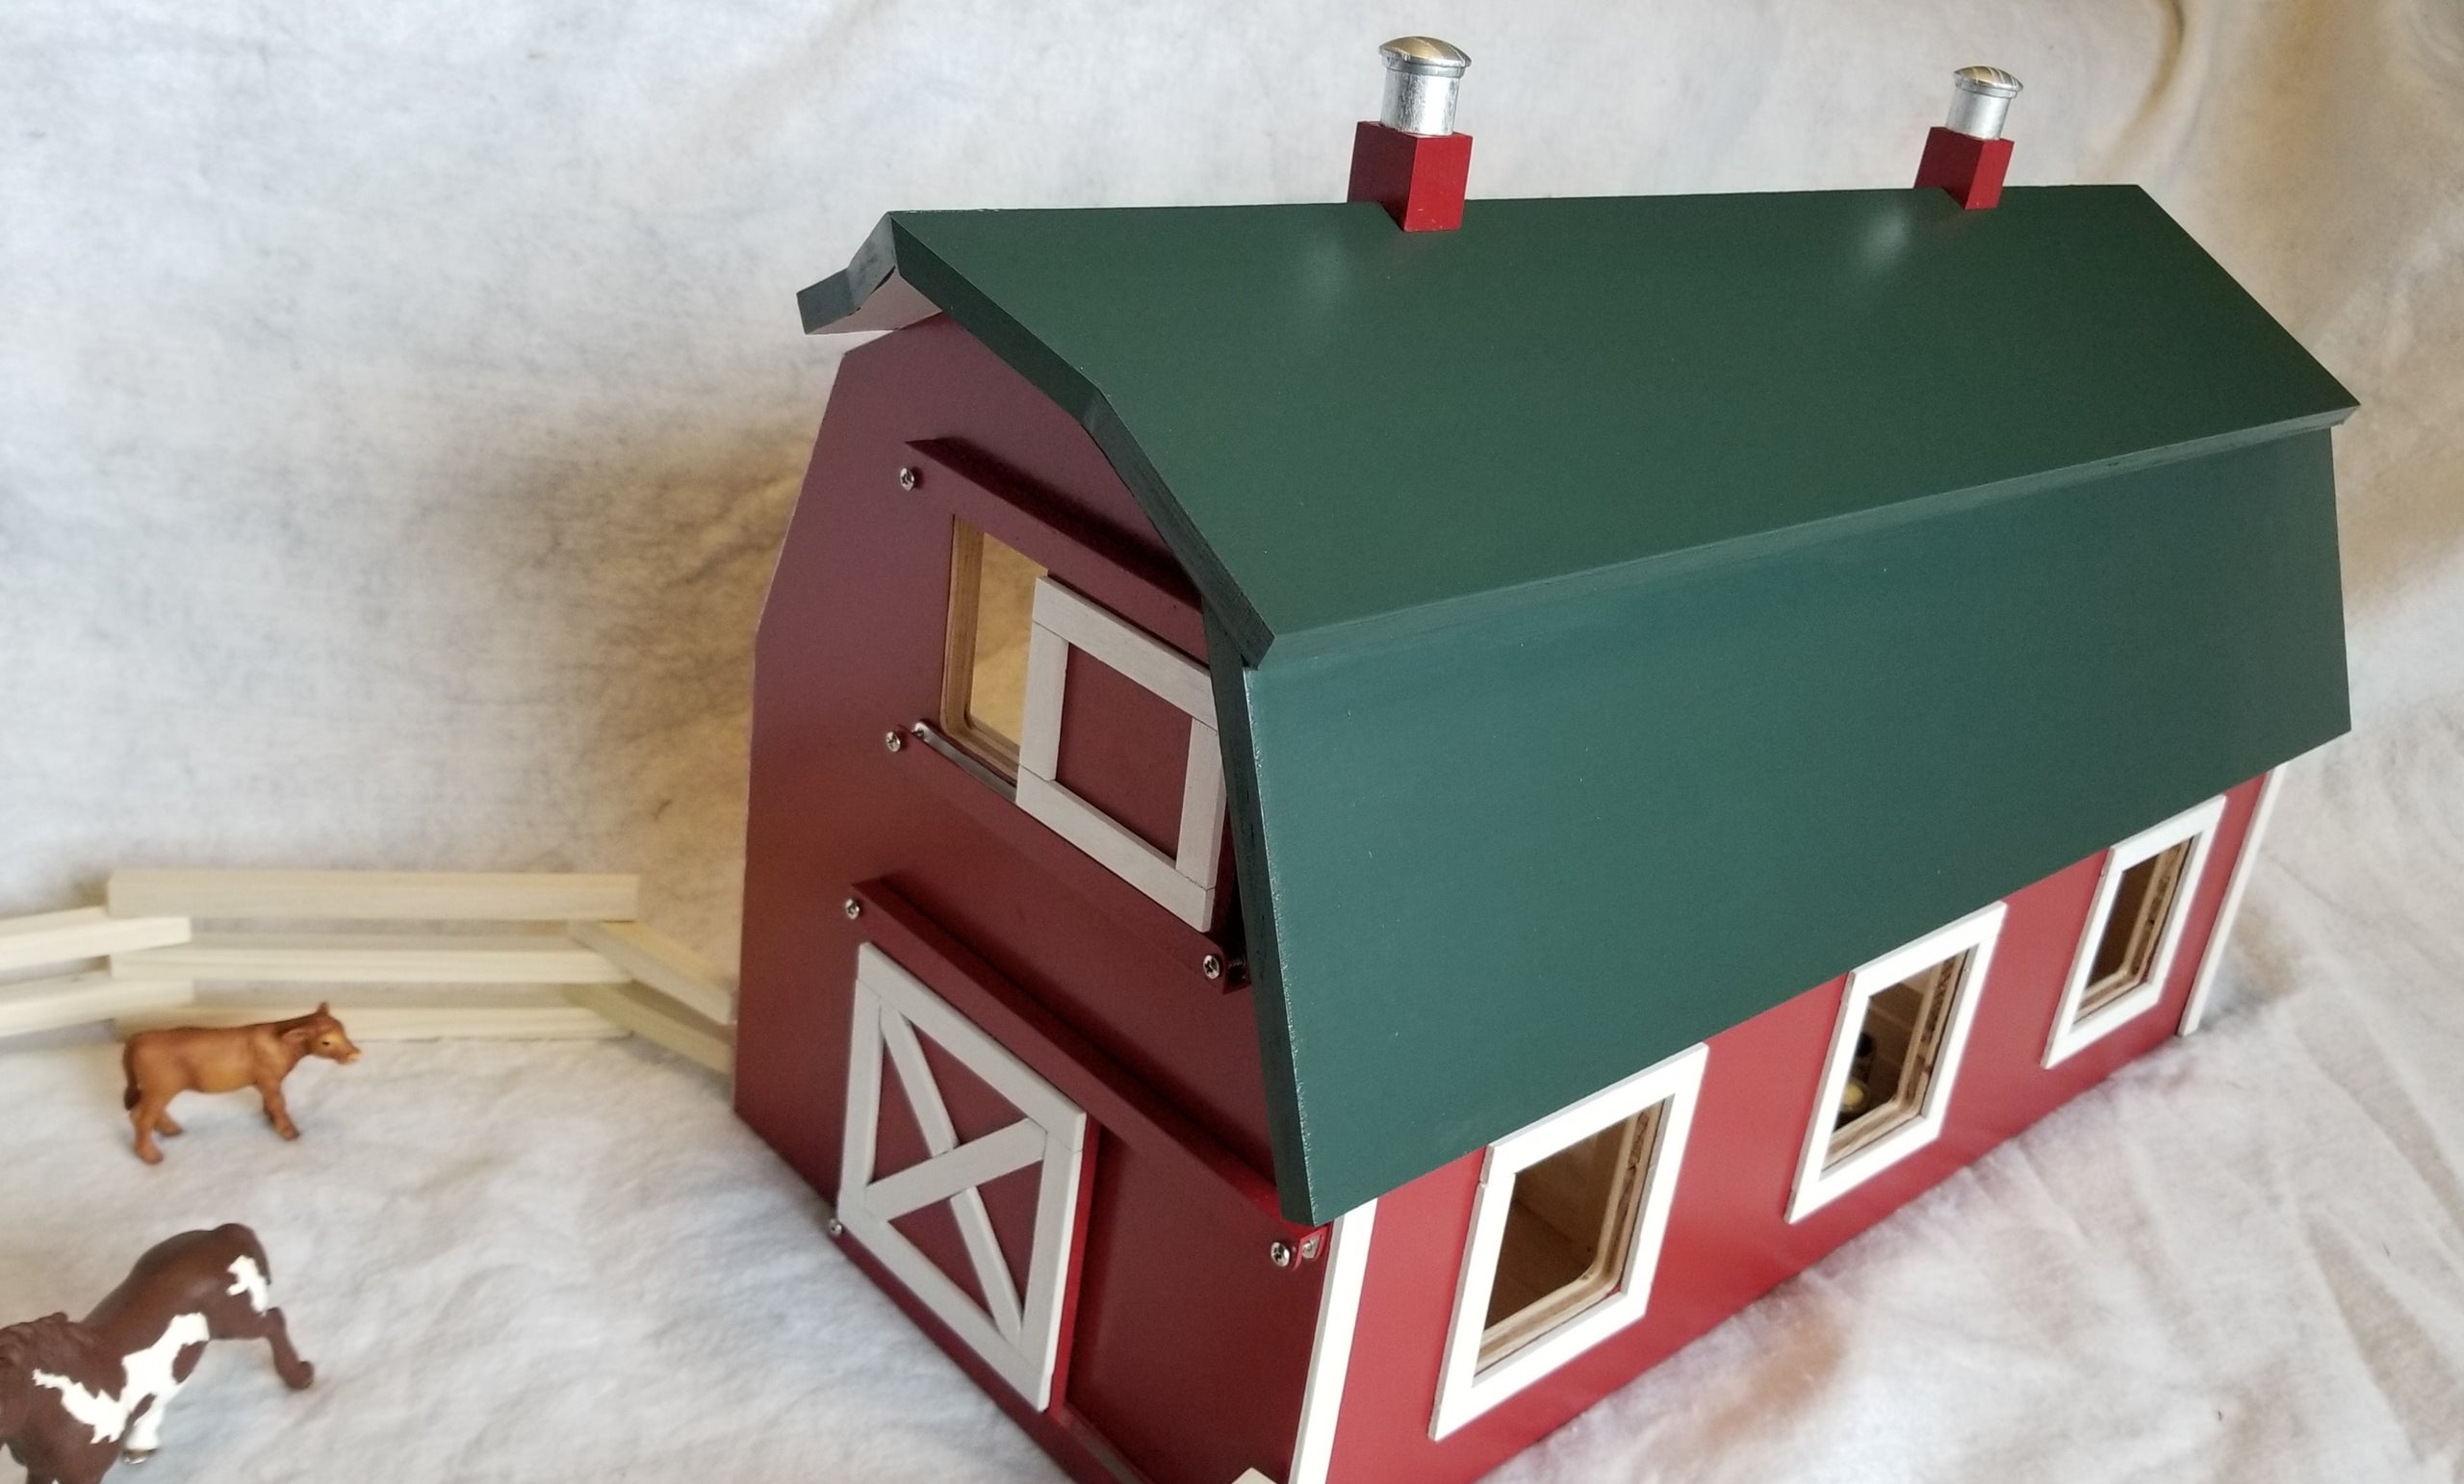 wooden toy barn kits